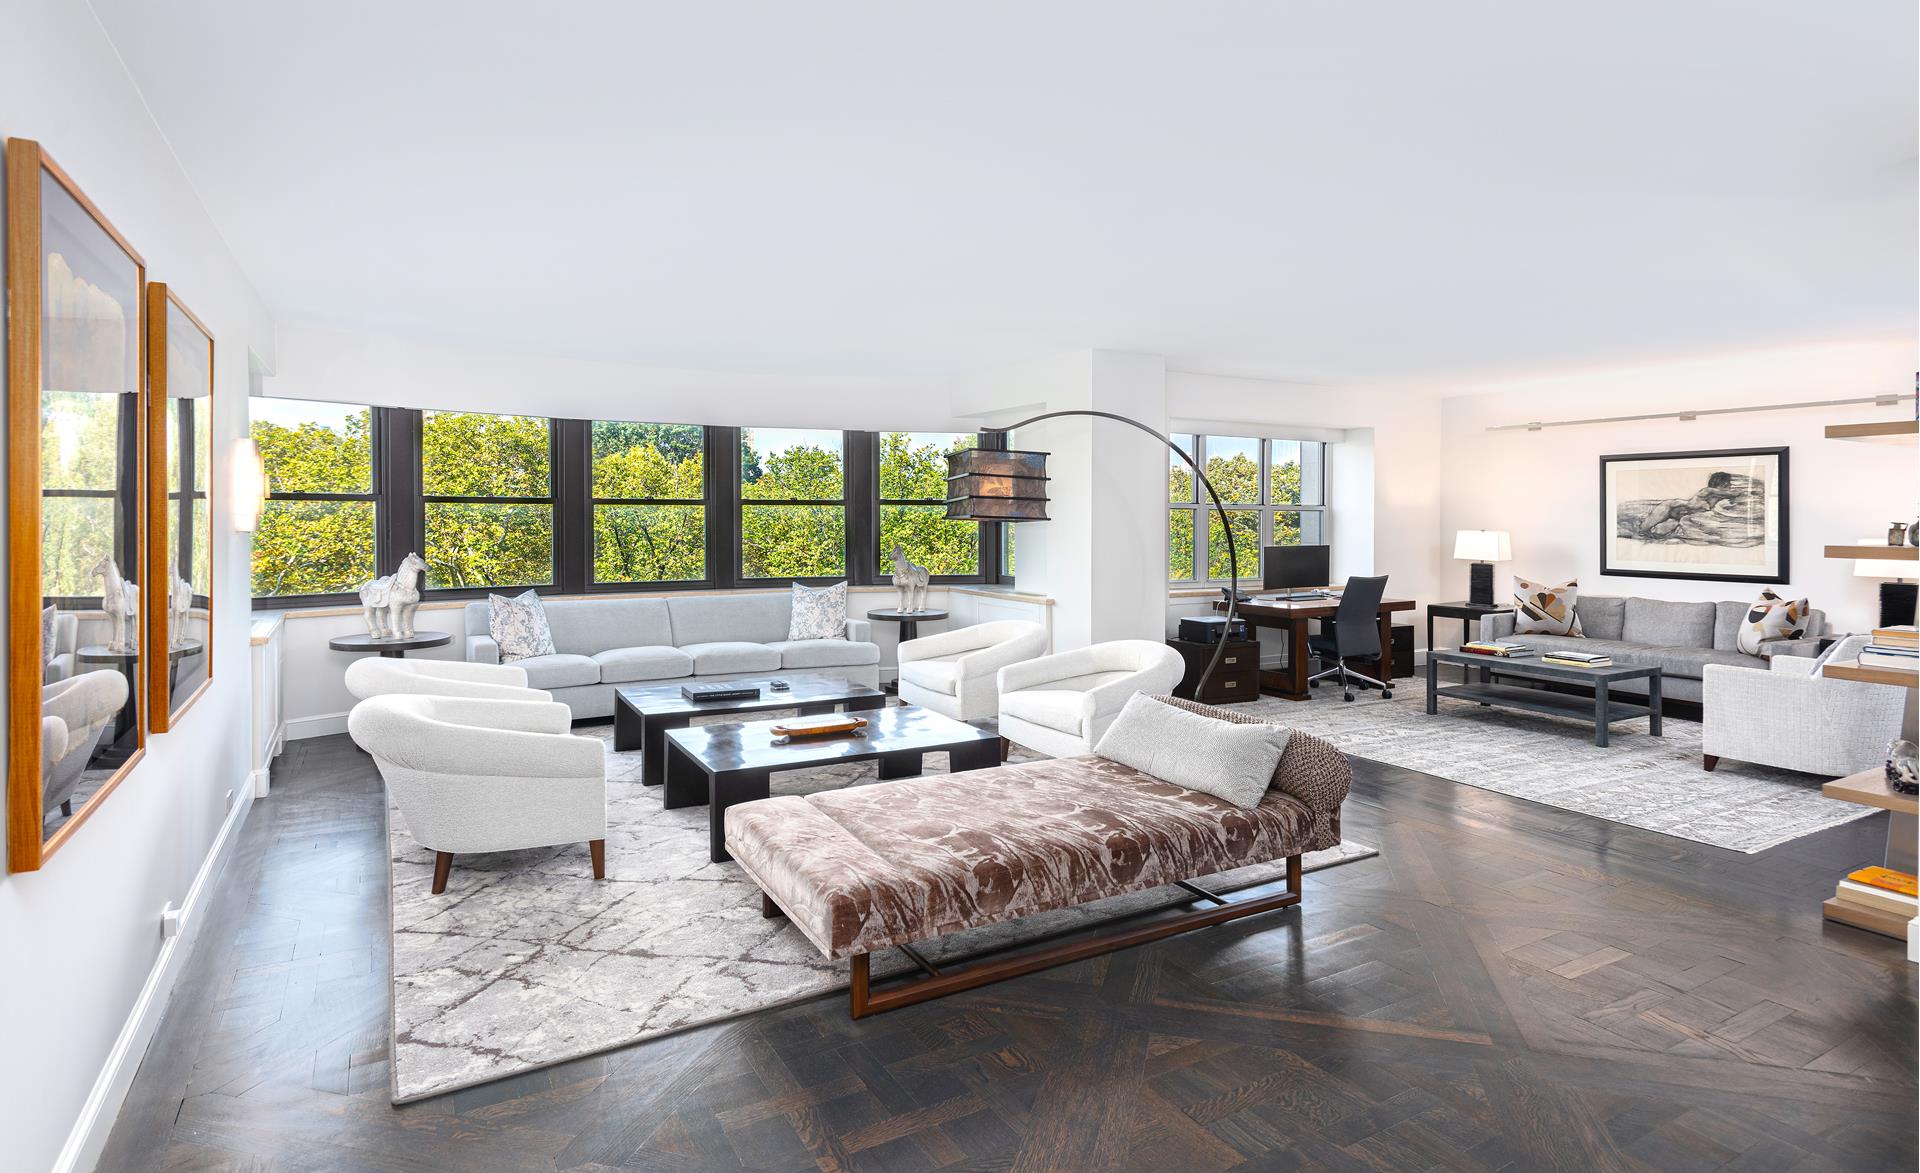 900 5th Avenue 7B, Lenox Hill, Upper East Side, NYC - 3 Bedrooms  
3.5 Bathrooms  
6 Rooms - 